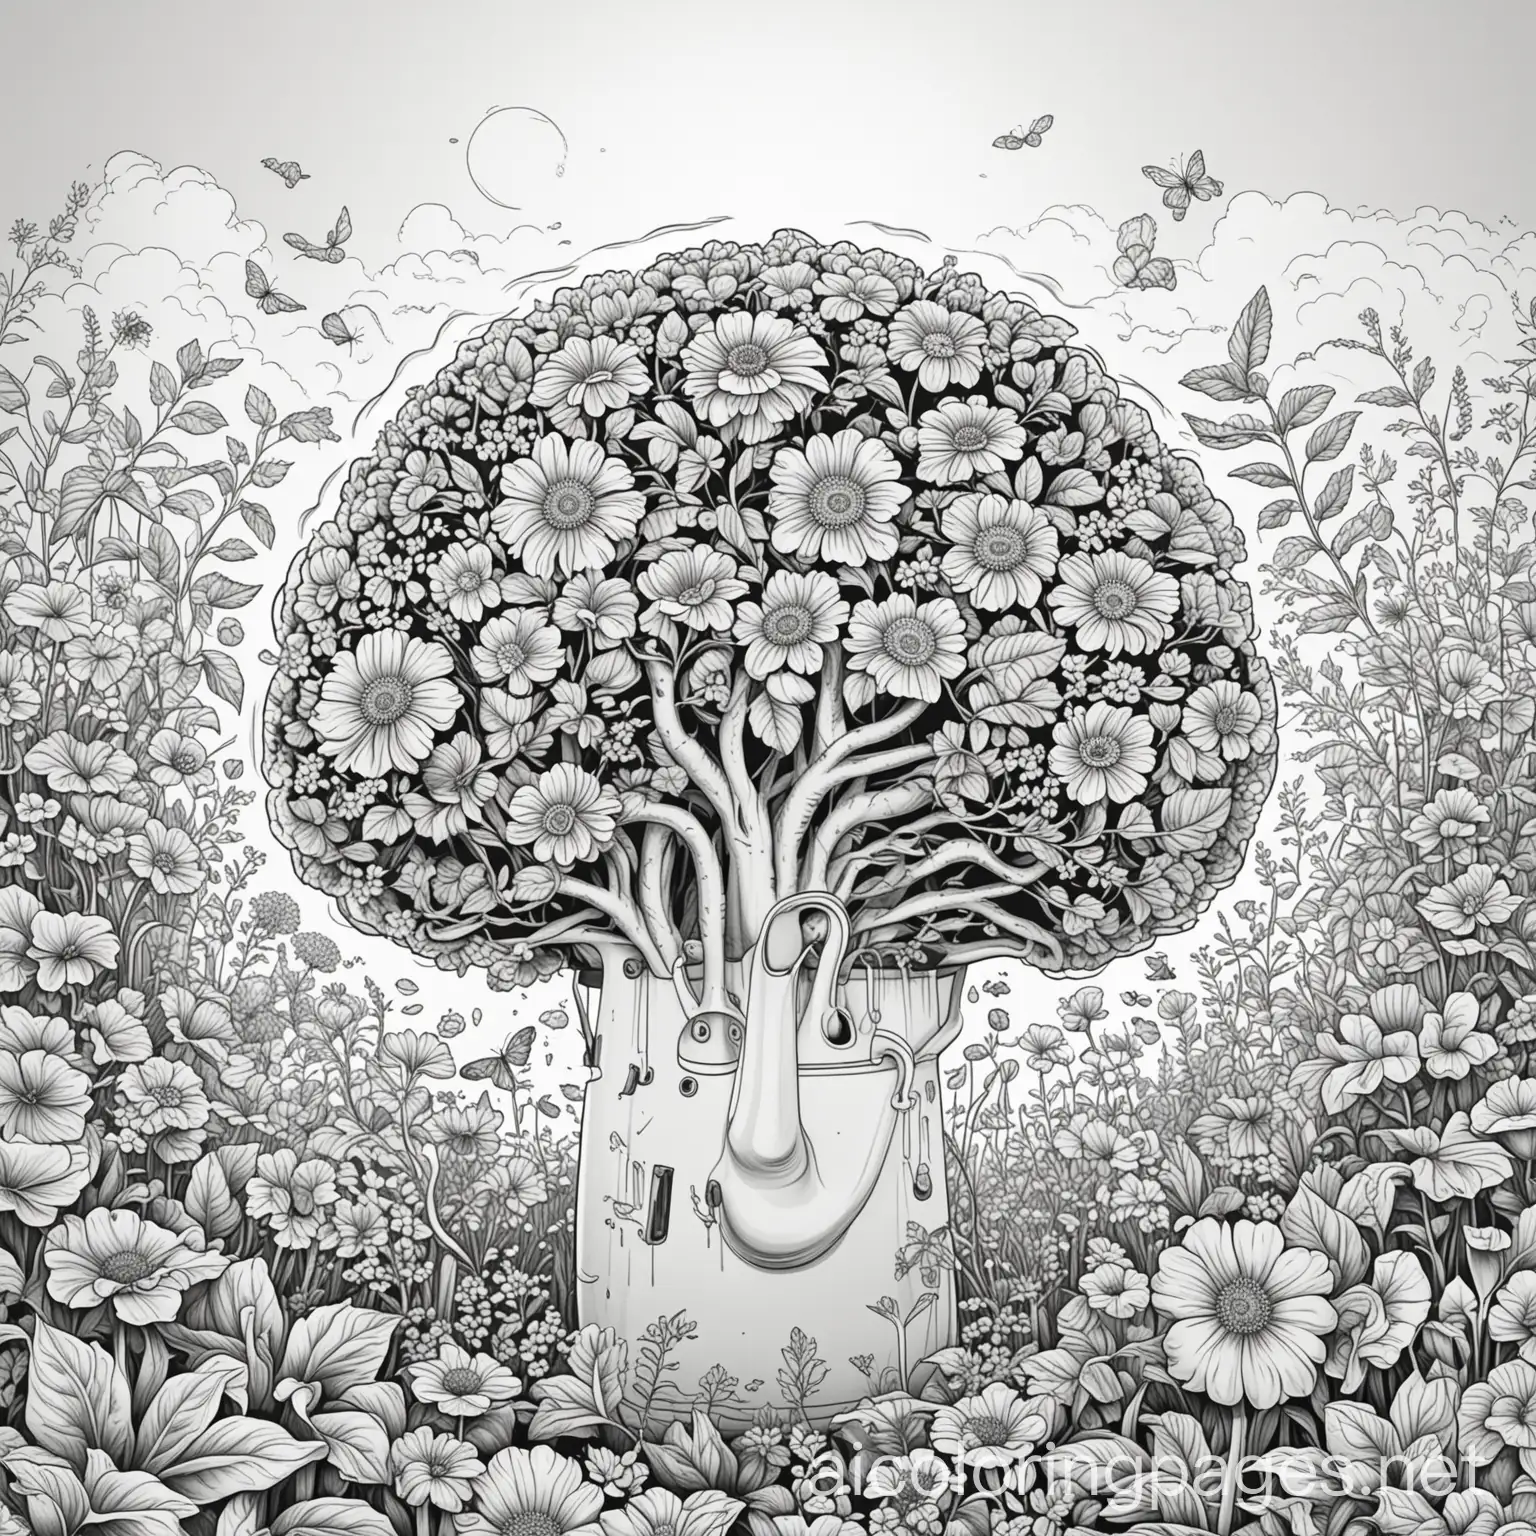 An outlined illustration of a garden scene with a large brain or mind shape in the center. The brain is surrounded by flowers, leaves, and vines, with a small watering can and sunshine above, line art, coloring page, black and white, white background, simplicity, Coloring Page, black and white, line art, white background, Simplicity, Ample White Space. The background of the coloring page is plain white to make it easy for young children to color within the lines. The outlines of all the subjects are easy to distinguish, making it simple for kids to color without too much difficulty